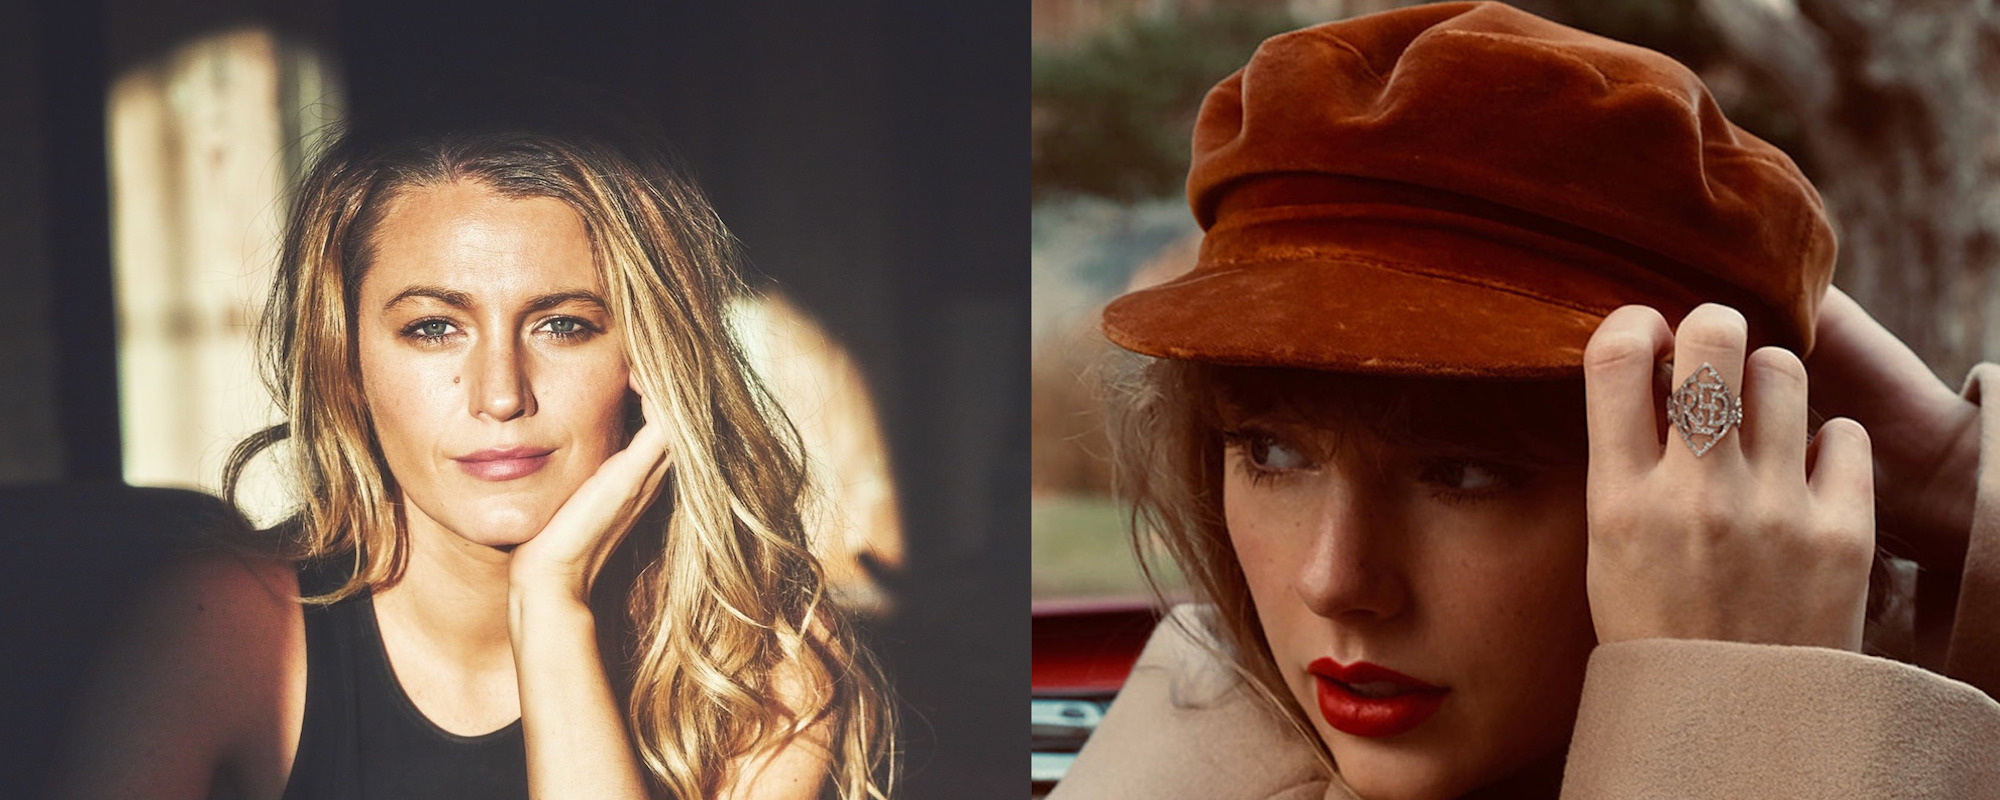 Blake Lively Directs Taylor Swift Video “I Bet You Think About Me”